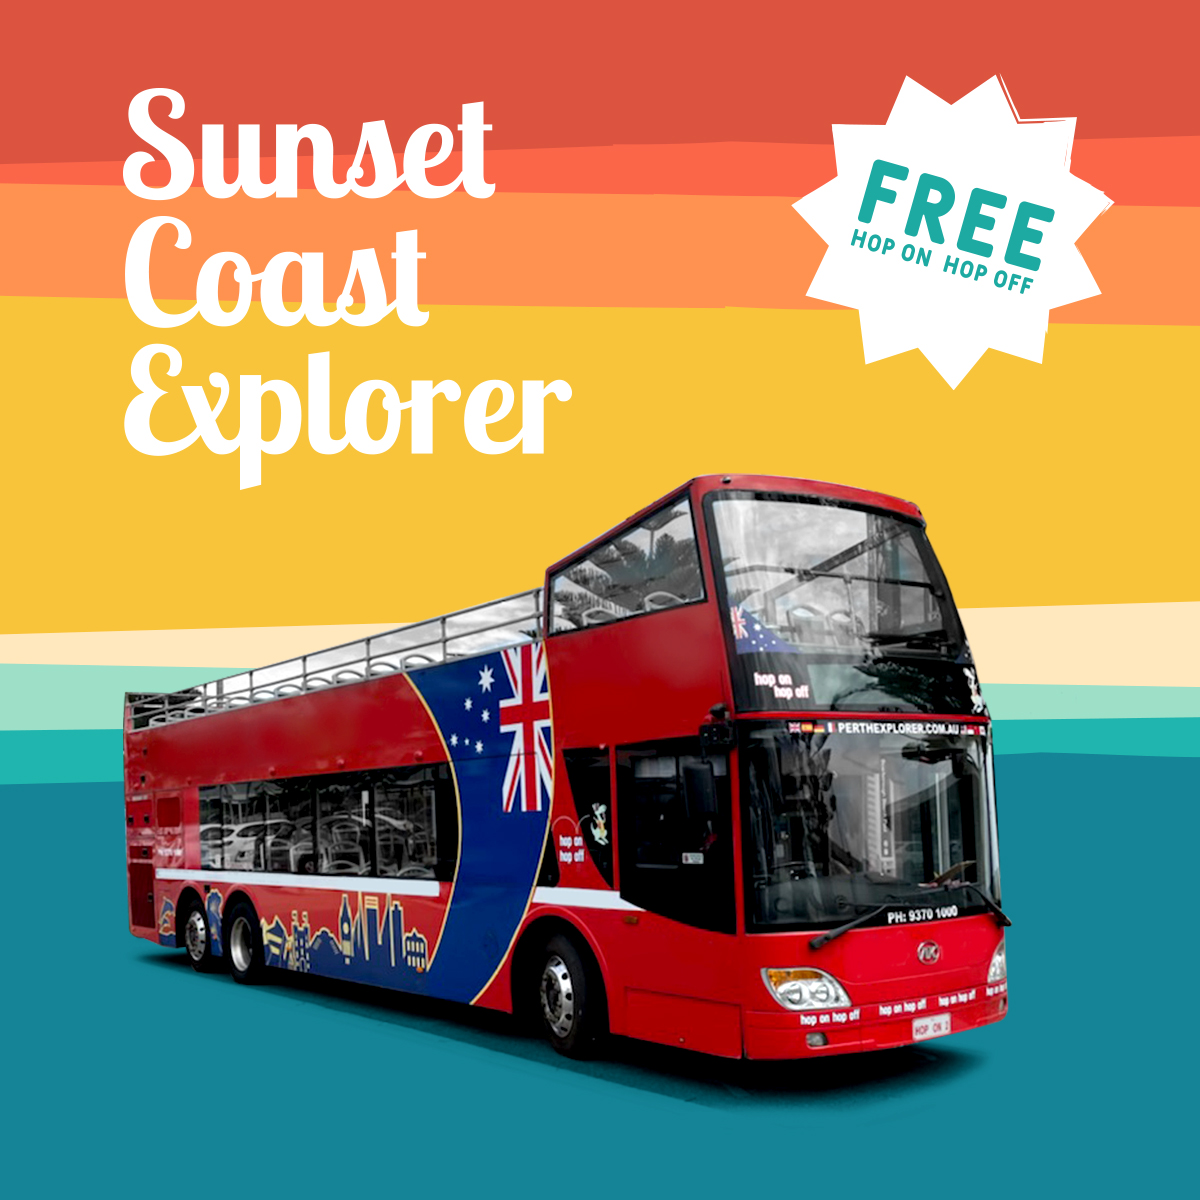 Take the family for a ride aboard the #sunsetcoastexplorer, commencing operation Sat 23 Oct! Running from Whitfords - Scarborough every Saturday & Sunday for 13 weeks, soak up the sun on WA's ONLY open-top bus for FREE! Click the link for more! 🚌destinationperth.com.au/bustimetable #seeperth